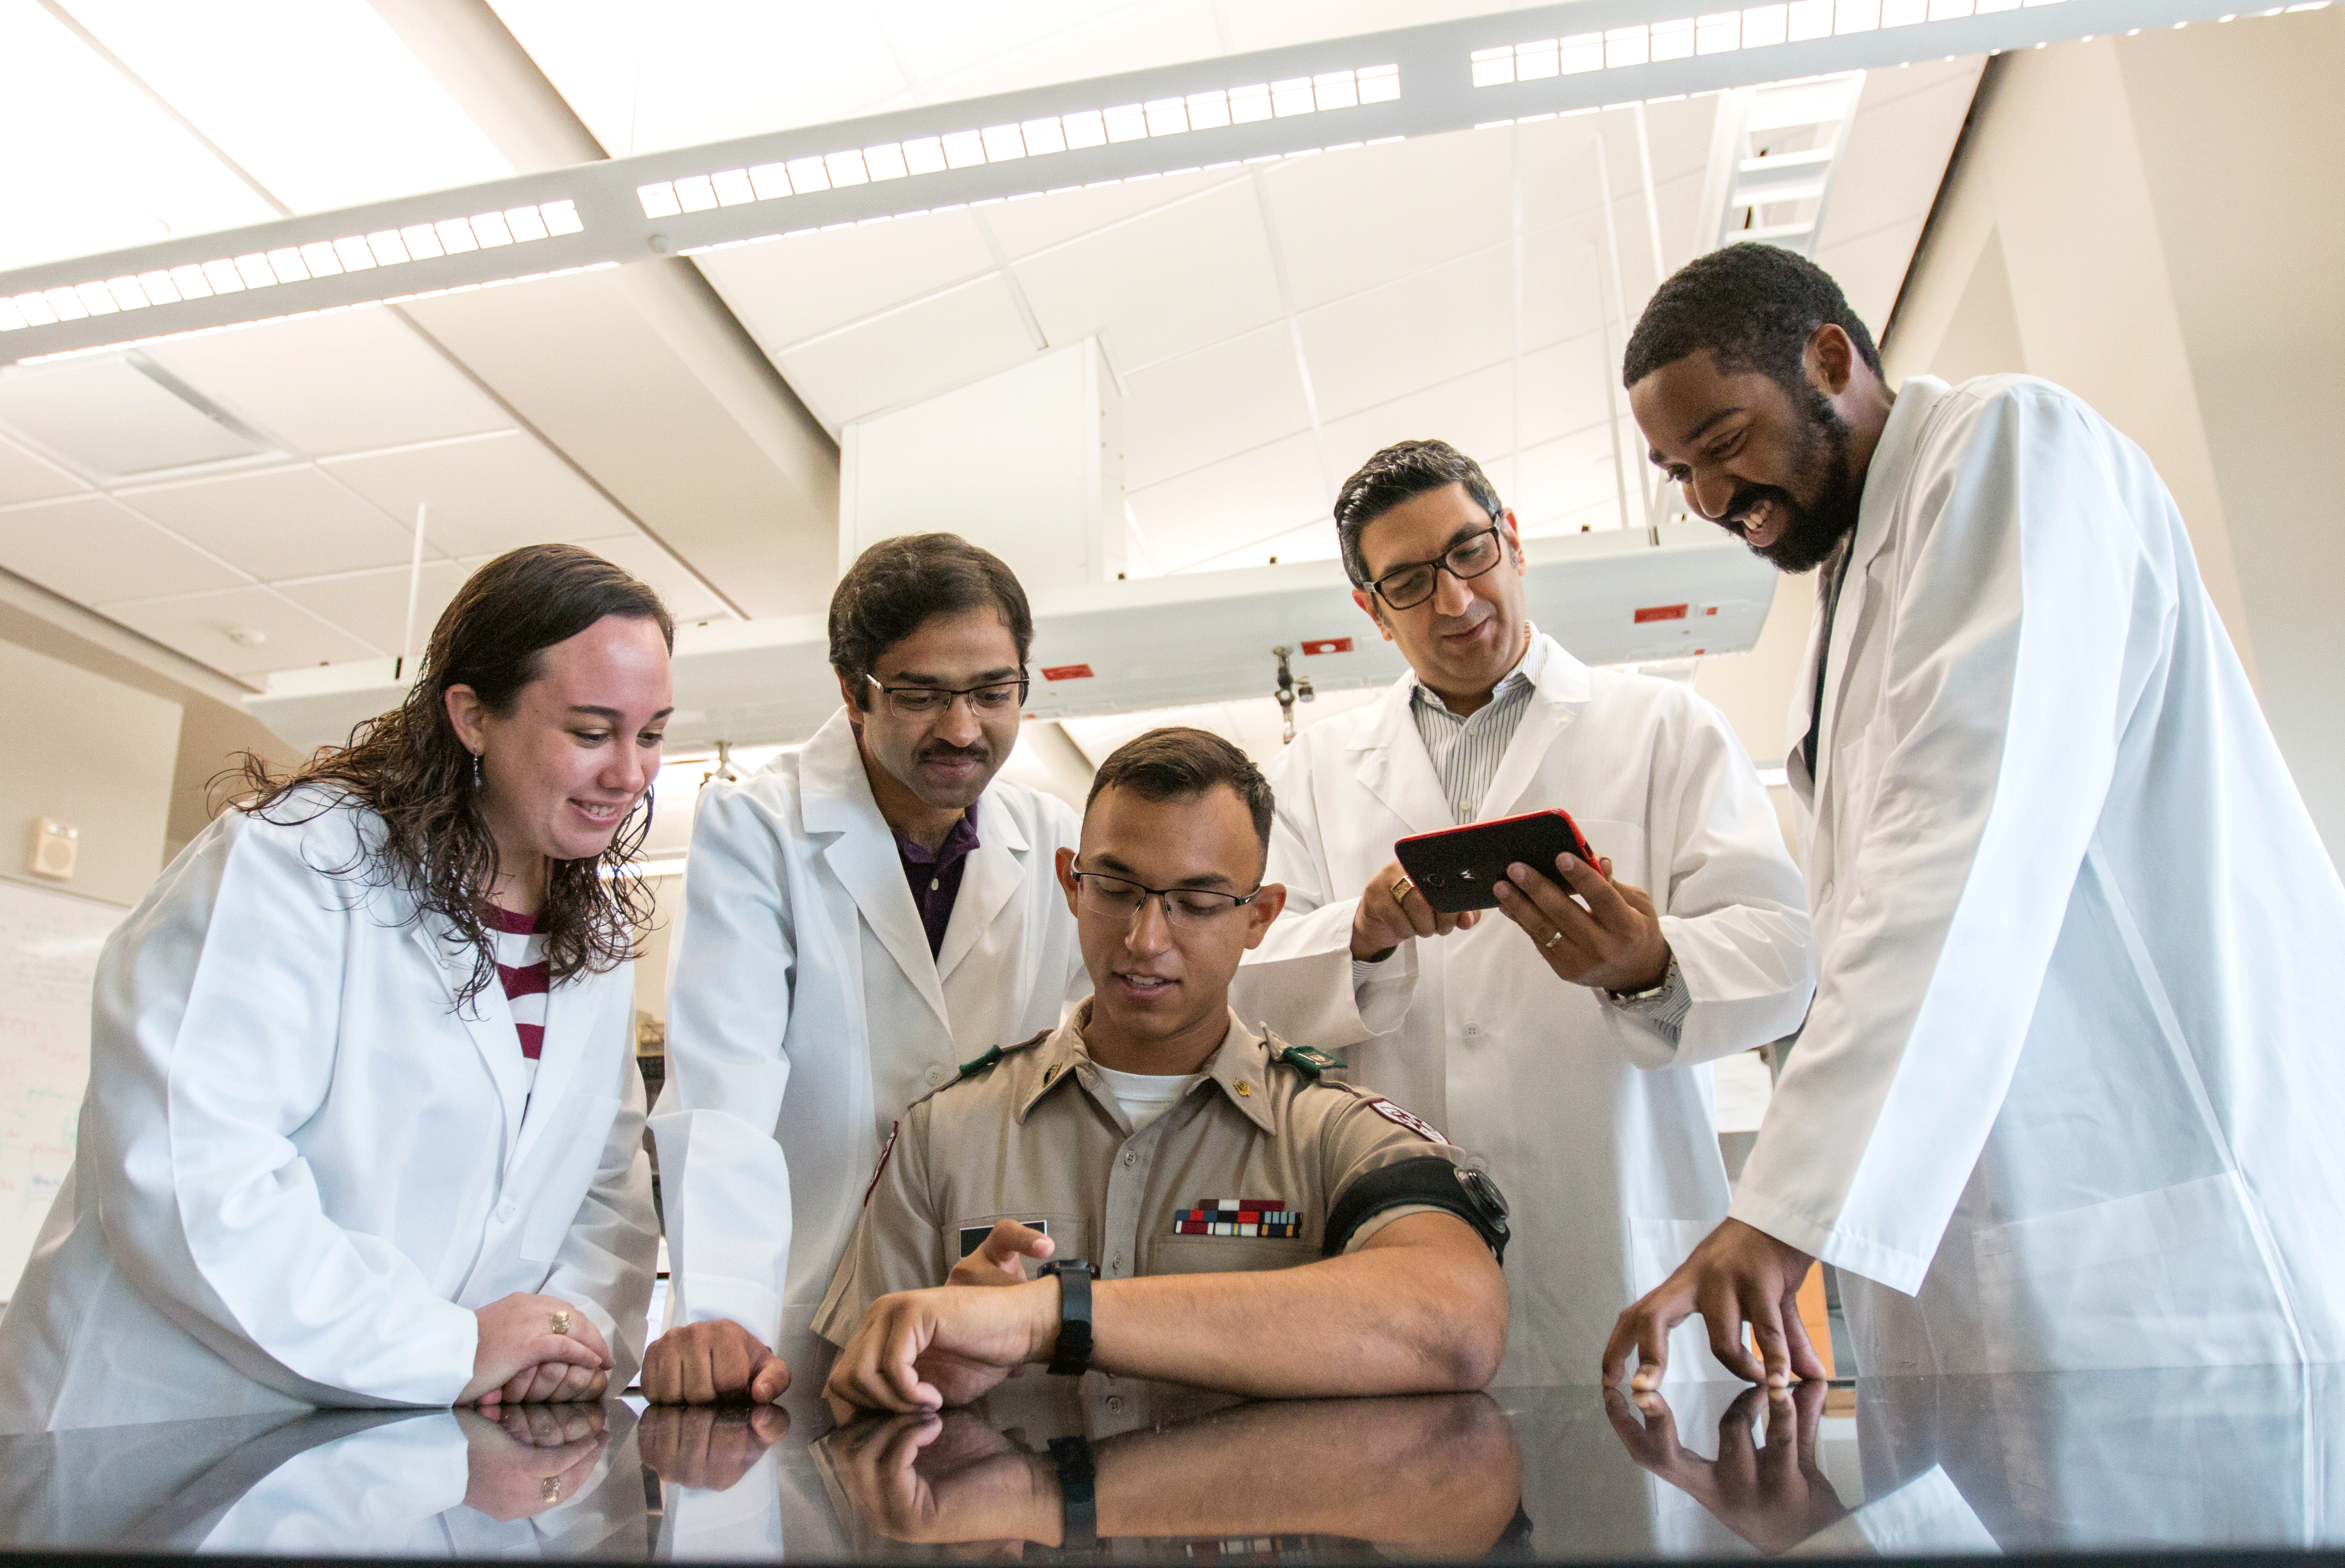 Dr. Sasangohar looking at a smart phone with other researchers and man in uniform is looking at a smart watch.